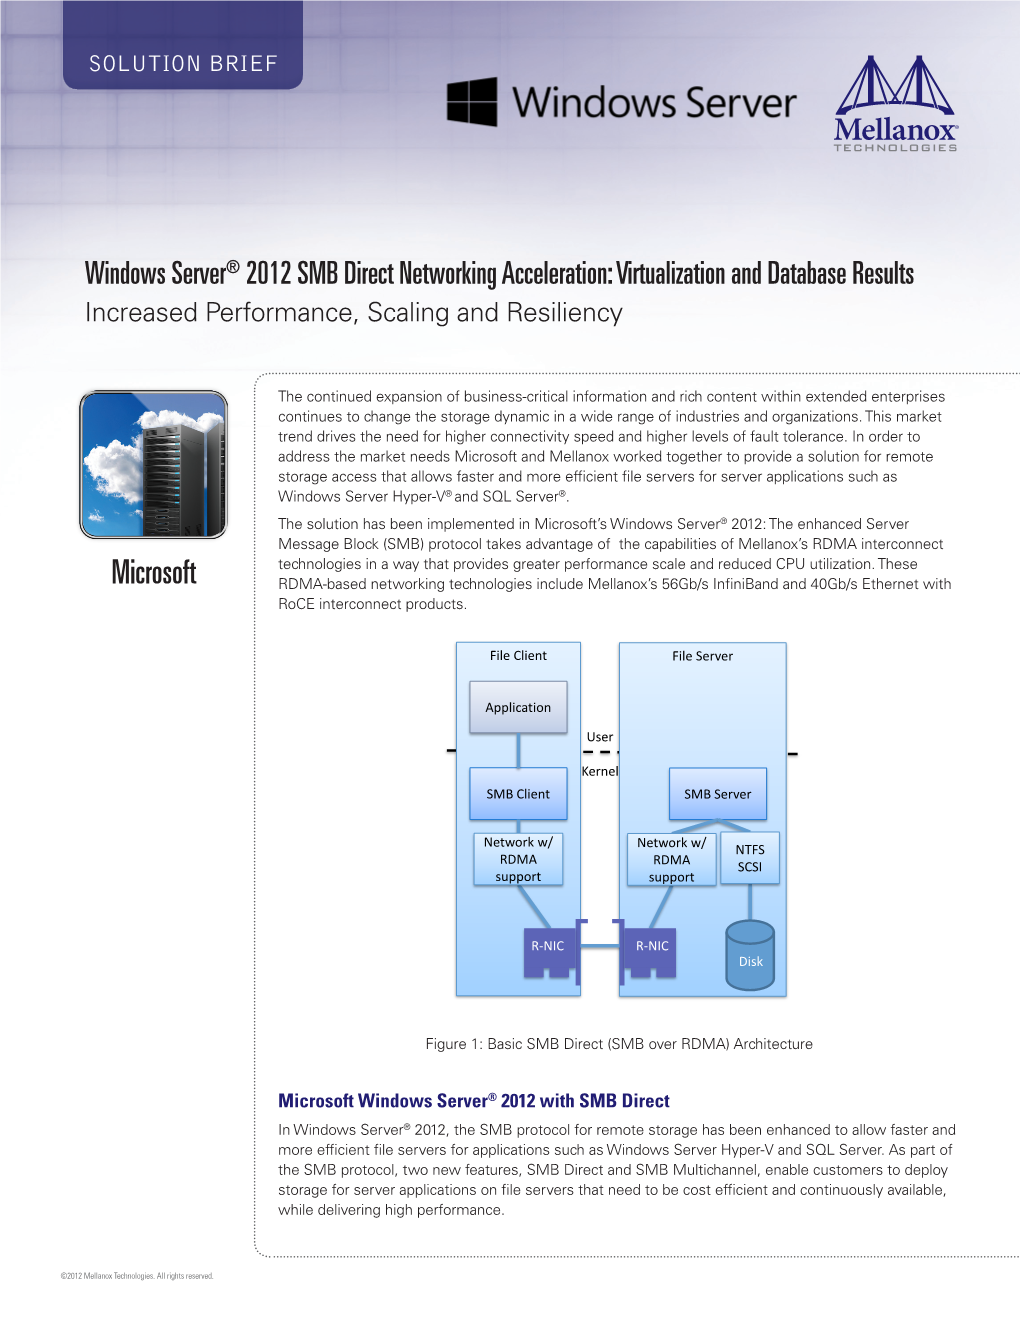 Windows Server® 2012 SMB Direct Networking Acceleration: Virtualization and Database Results Increased Performance, Scaling and Resiliency